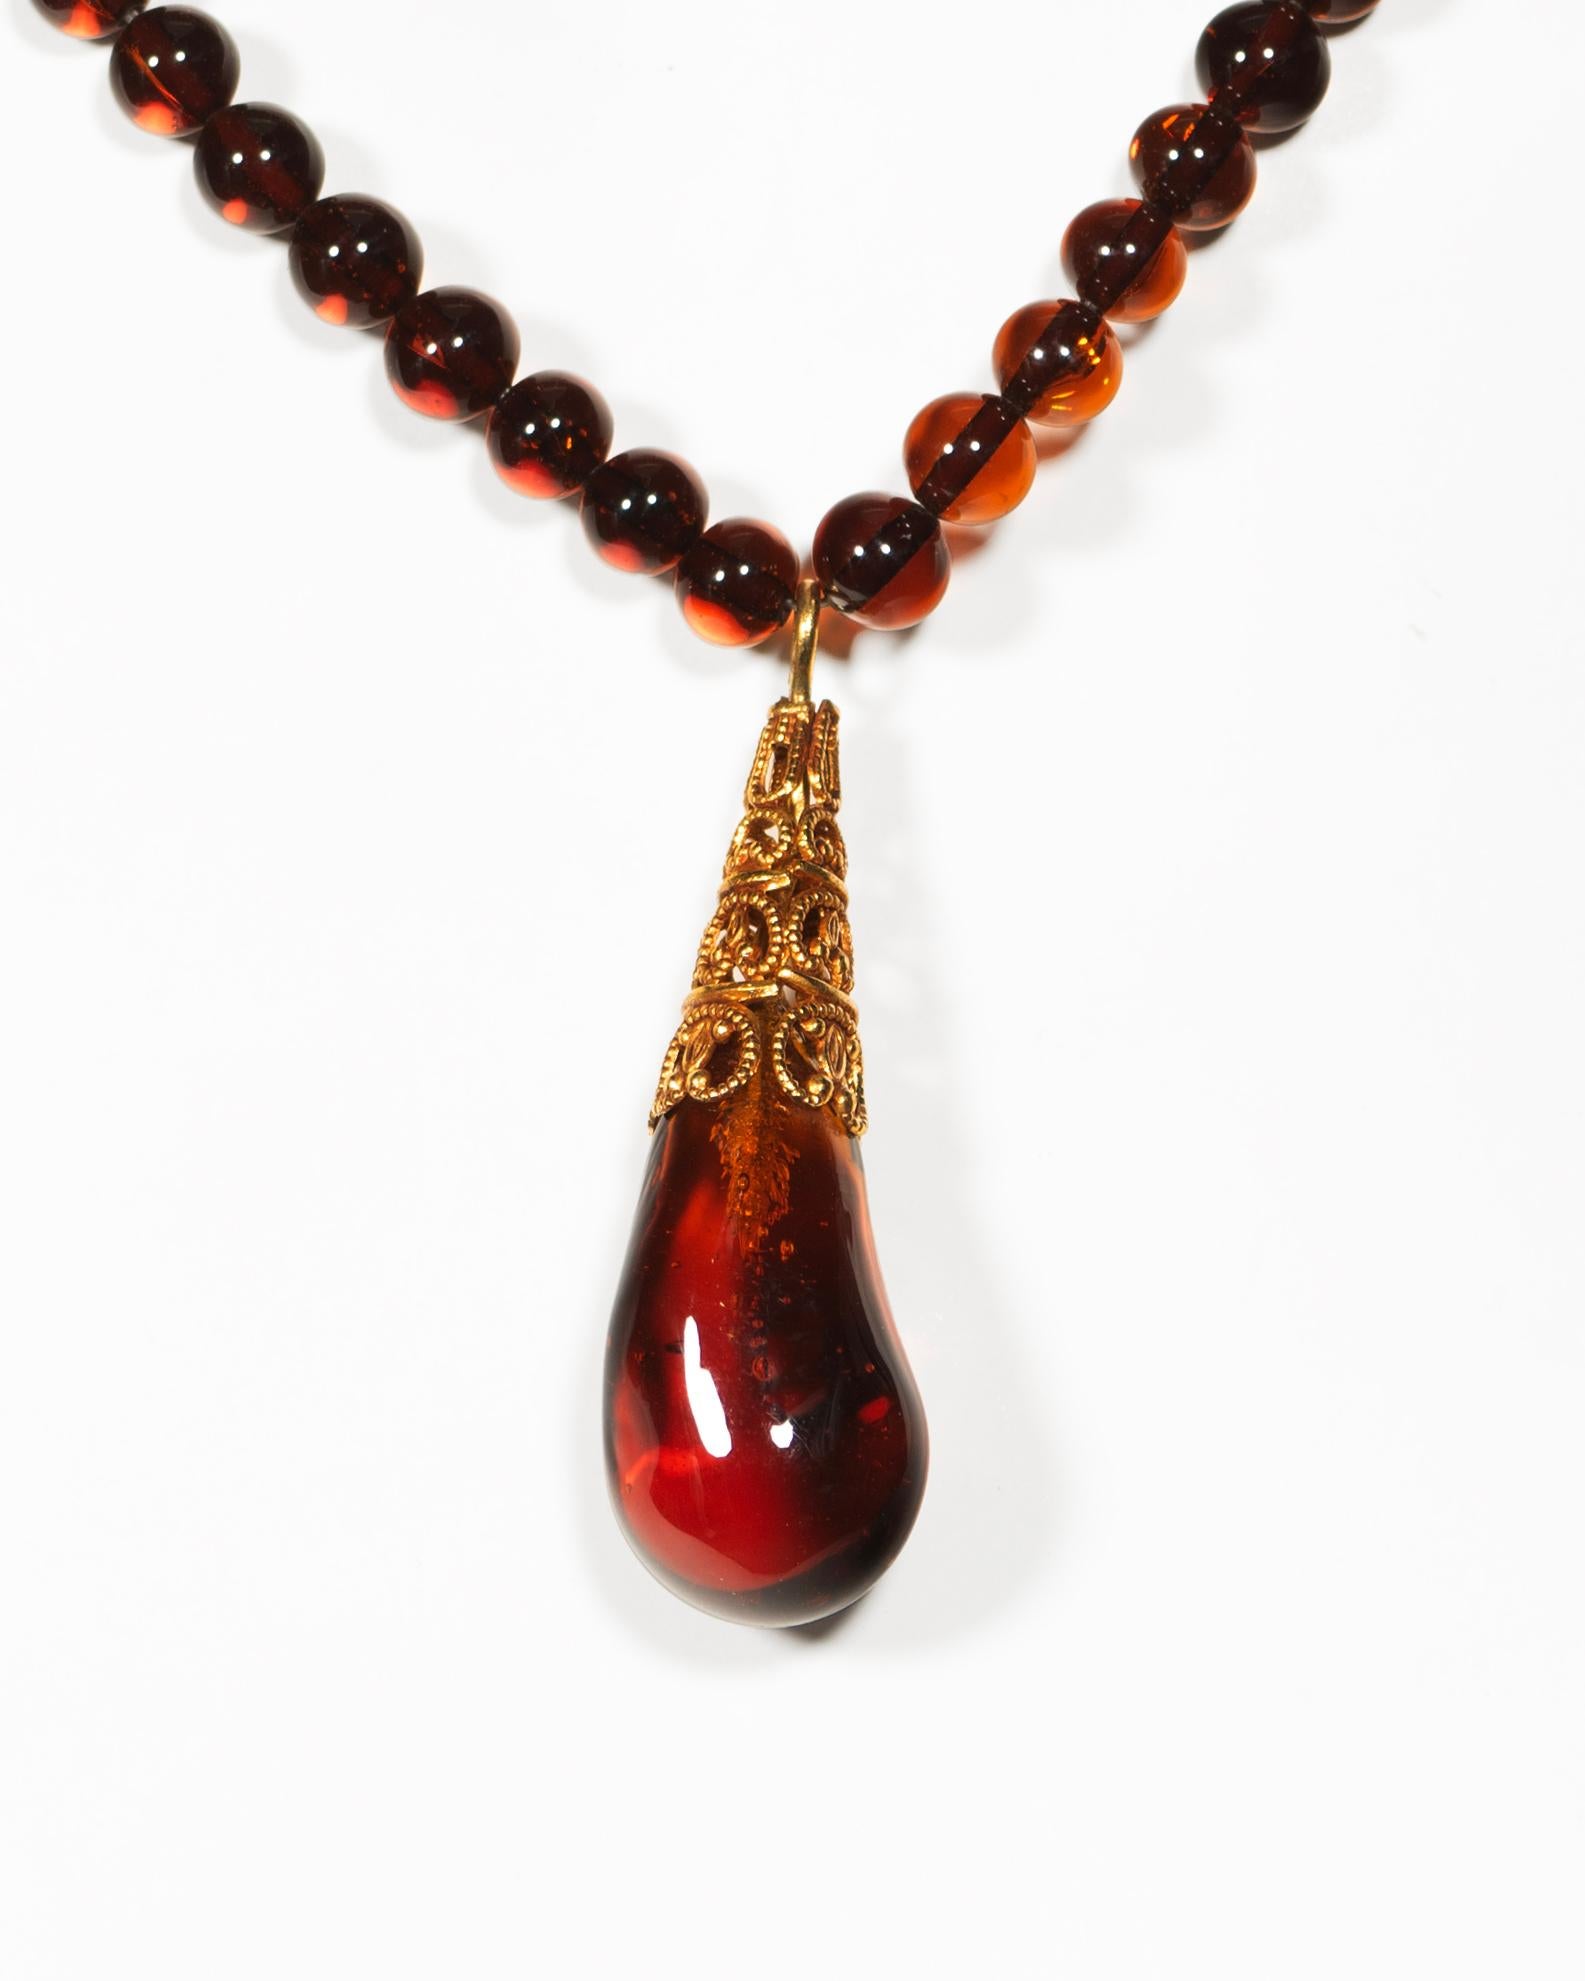 Christian Dior by John Galliano Amber Glass Bead Choker Necklace, c. 1998 In Excellent Condition For Sale In London, GB